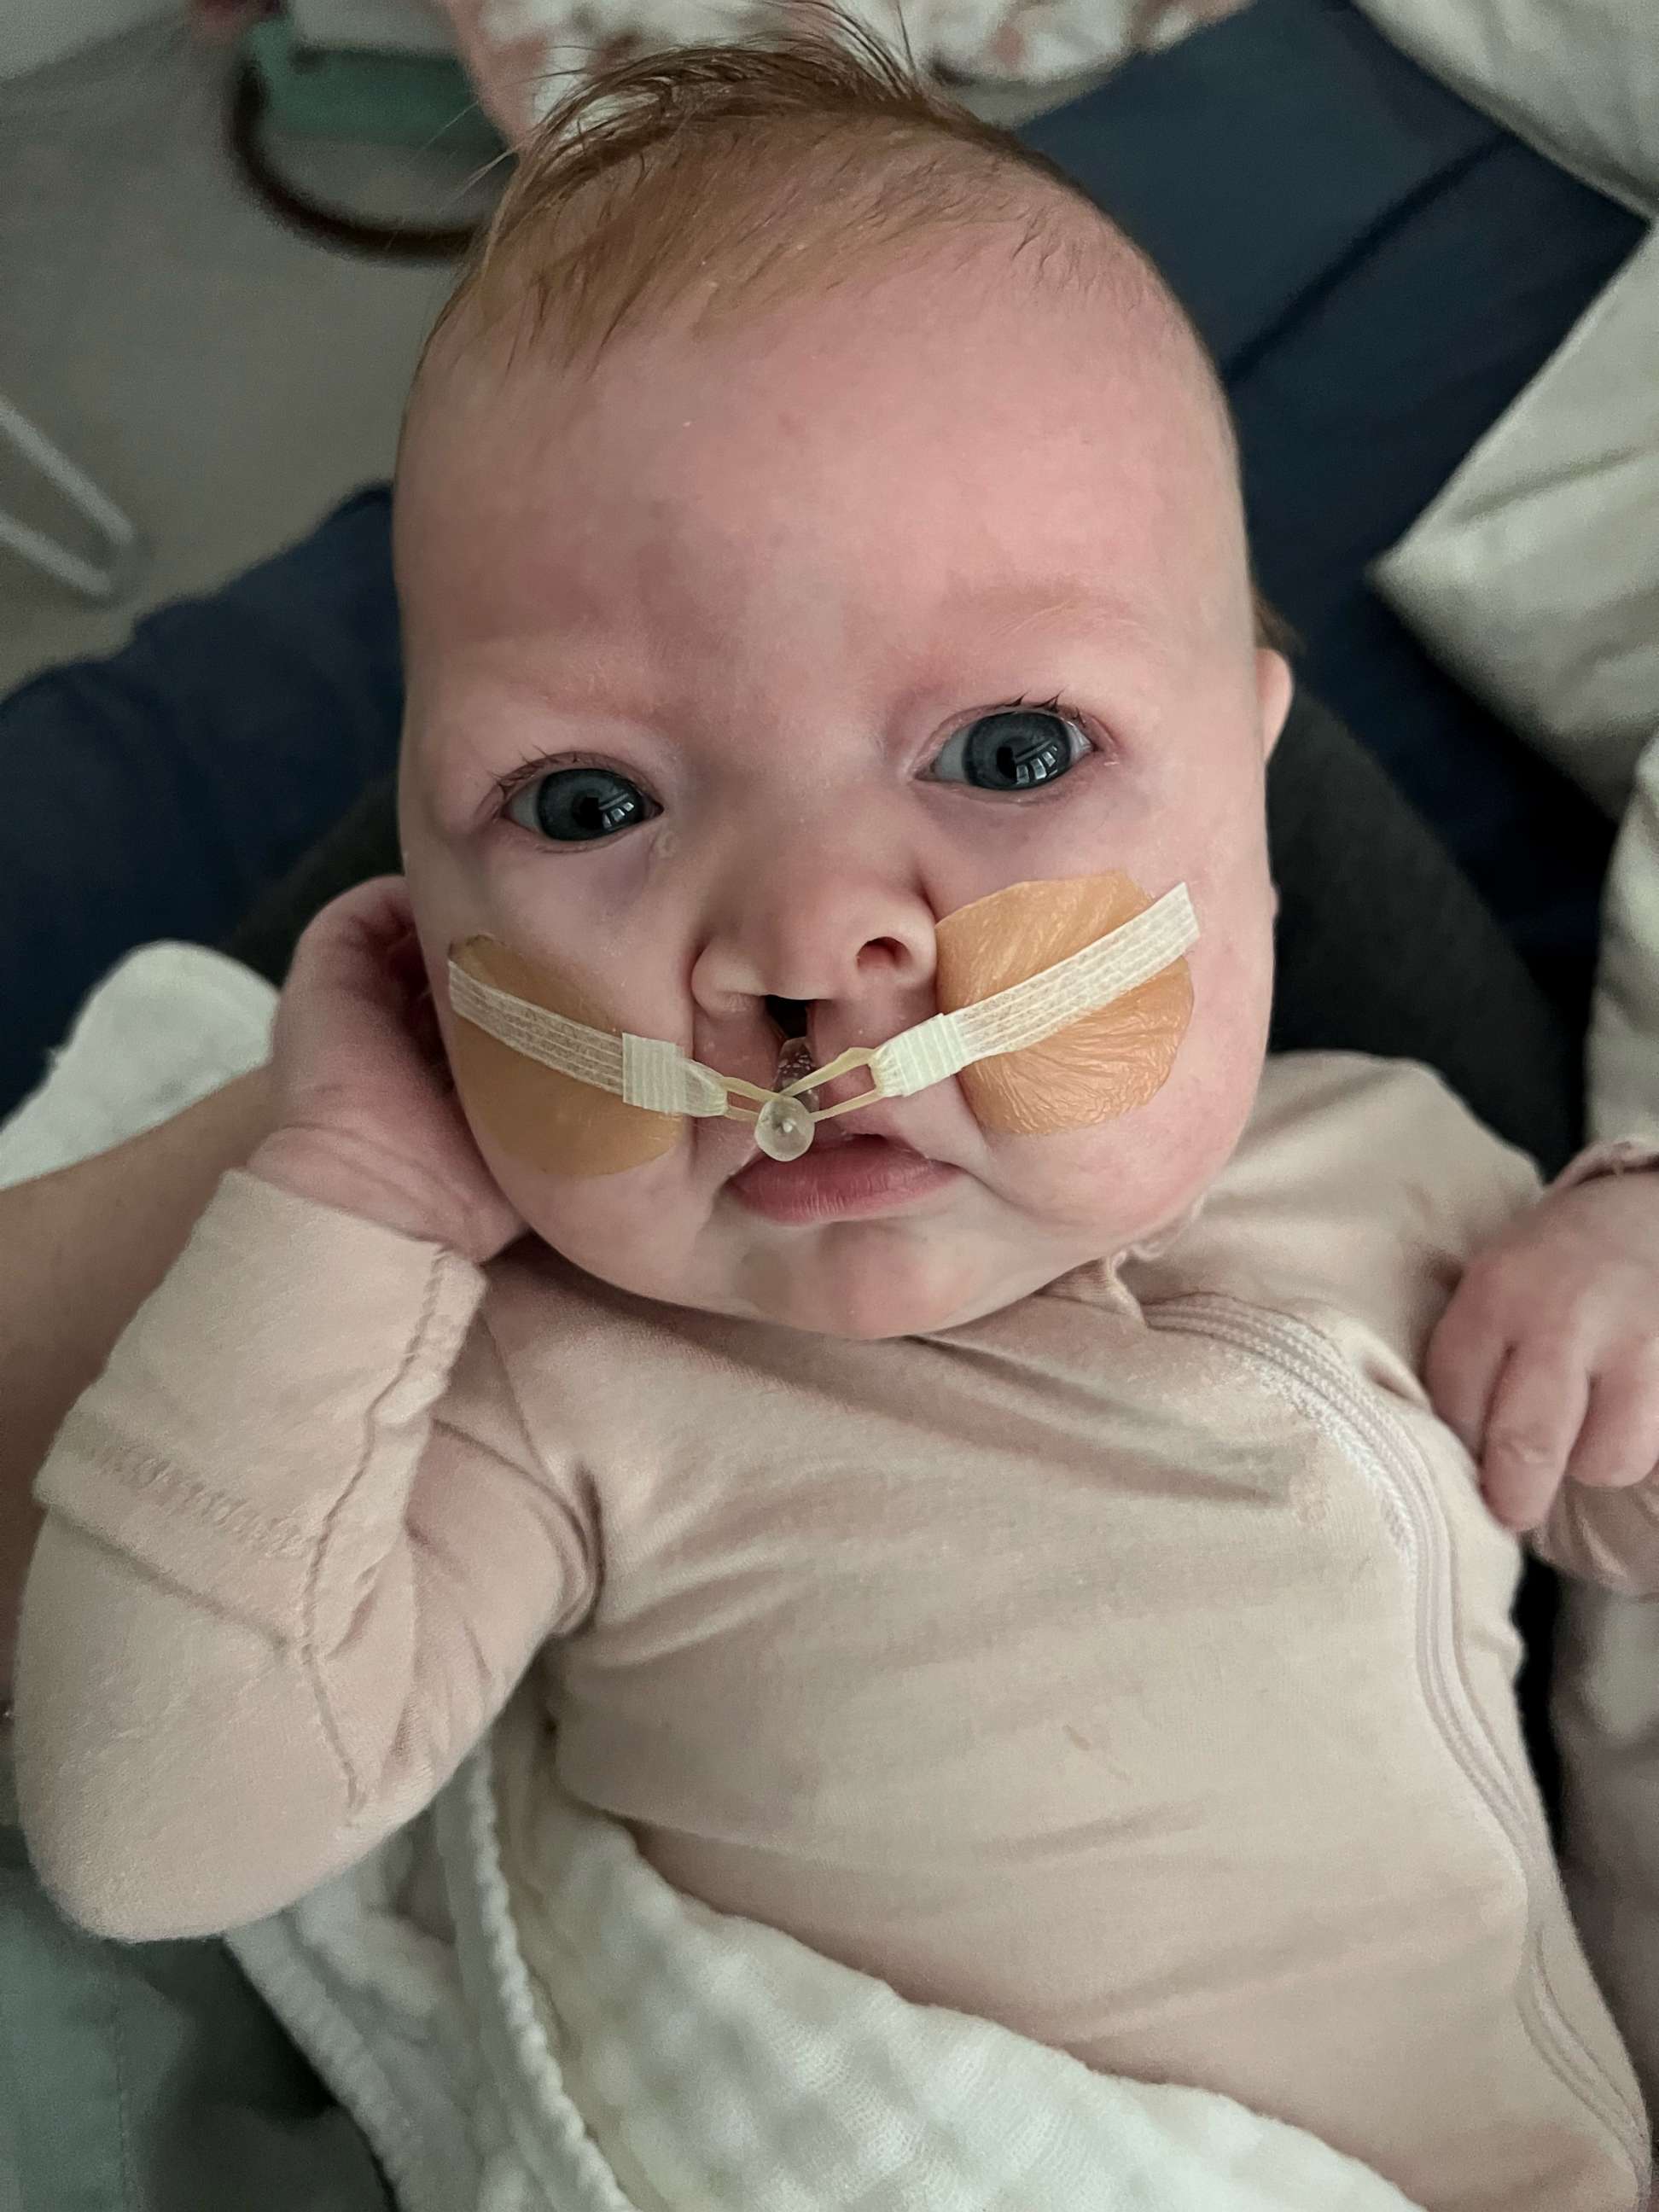 PHOTO: Sutton was diagnosed with a unilateral cleft lip and palate and will get surgery in the future to repair the defect in her lip.